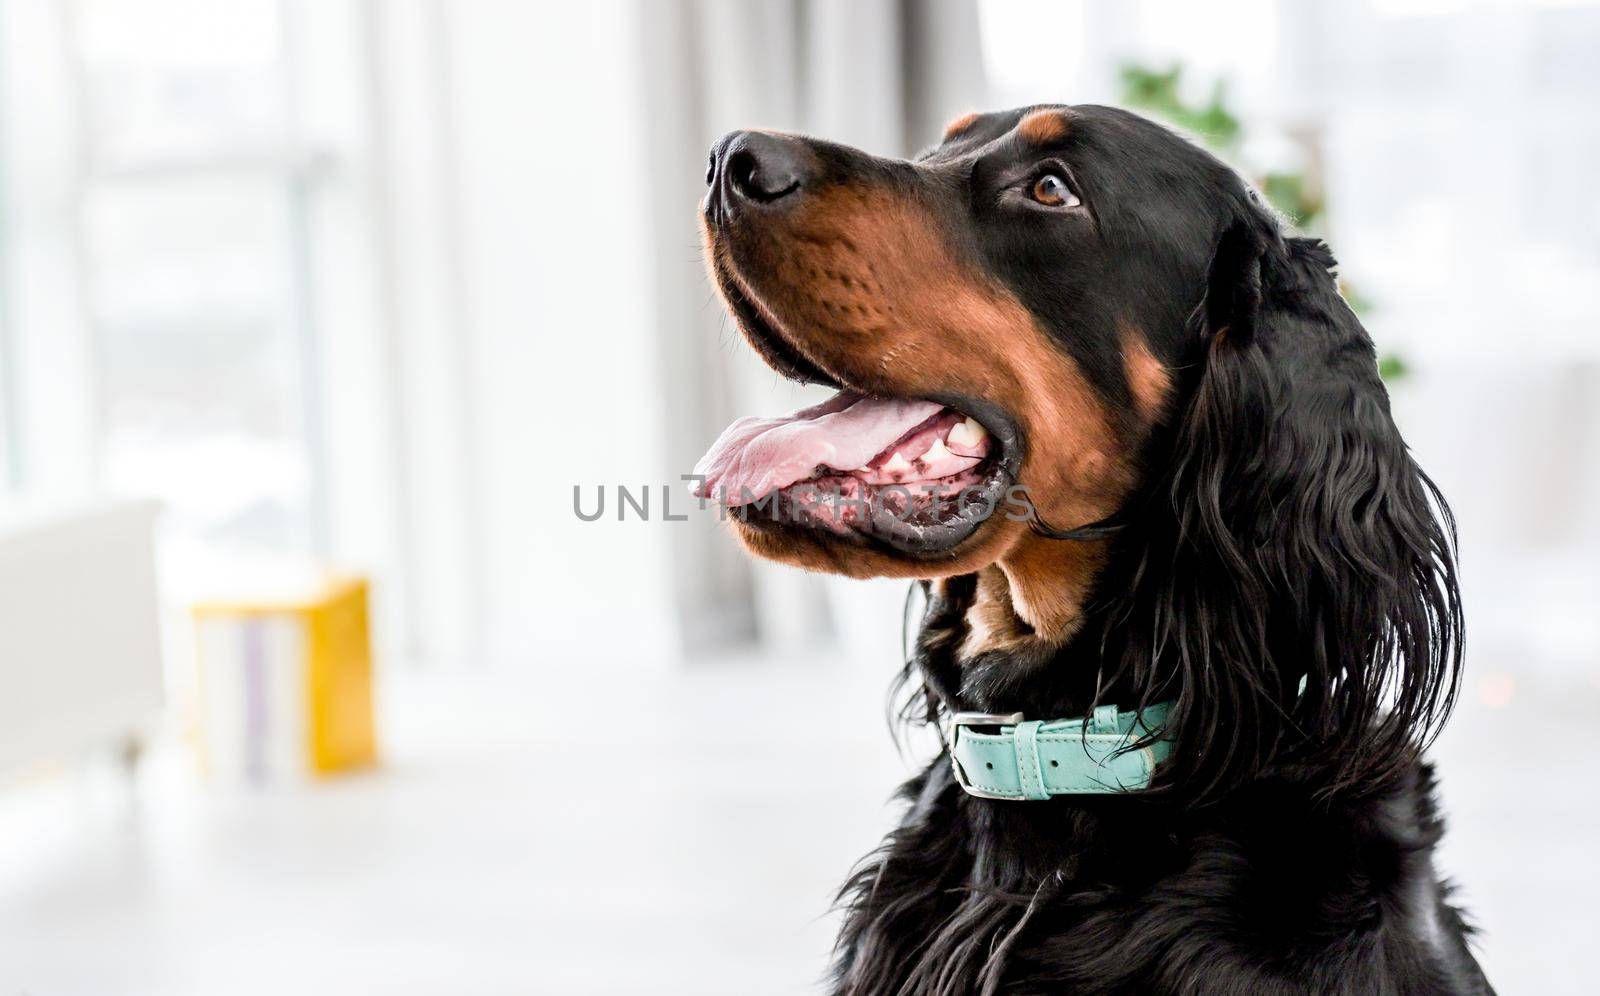 Cute setter dog in light room at home closeup portrait. Doggy pet with mouth open